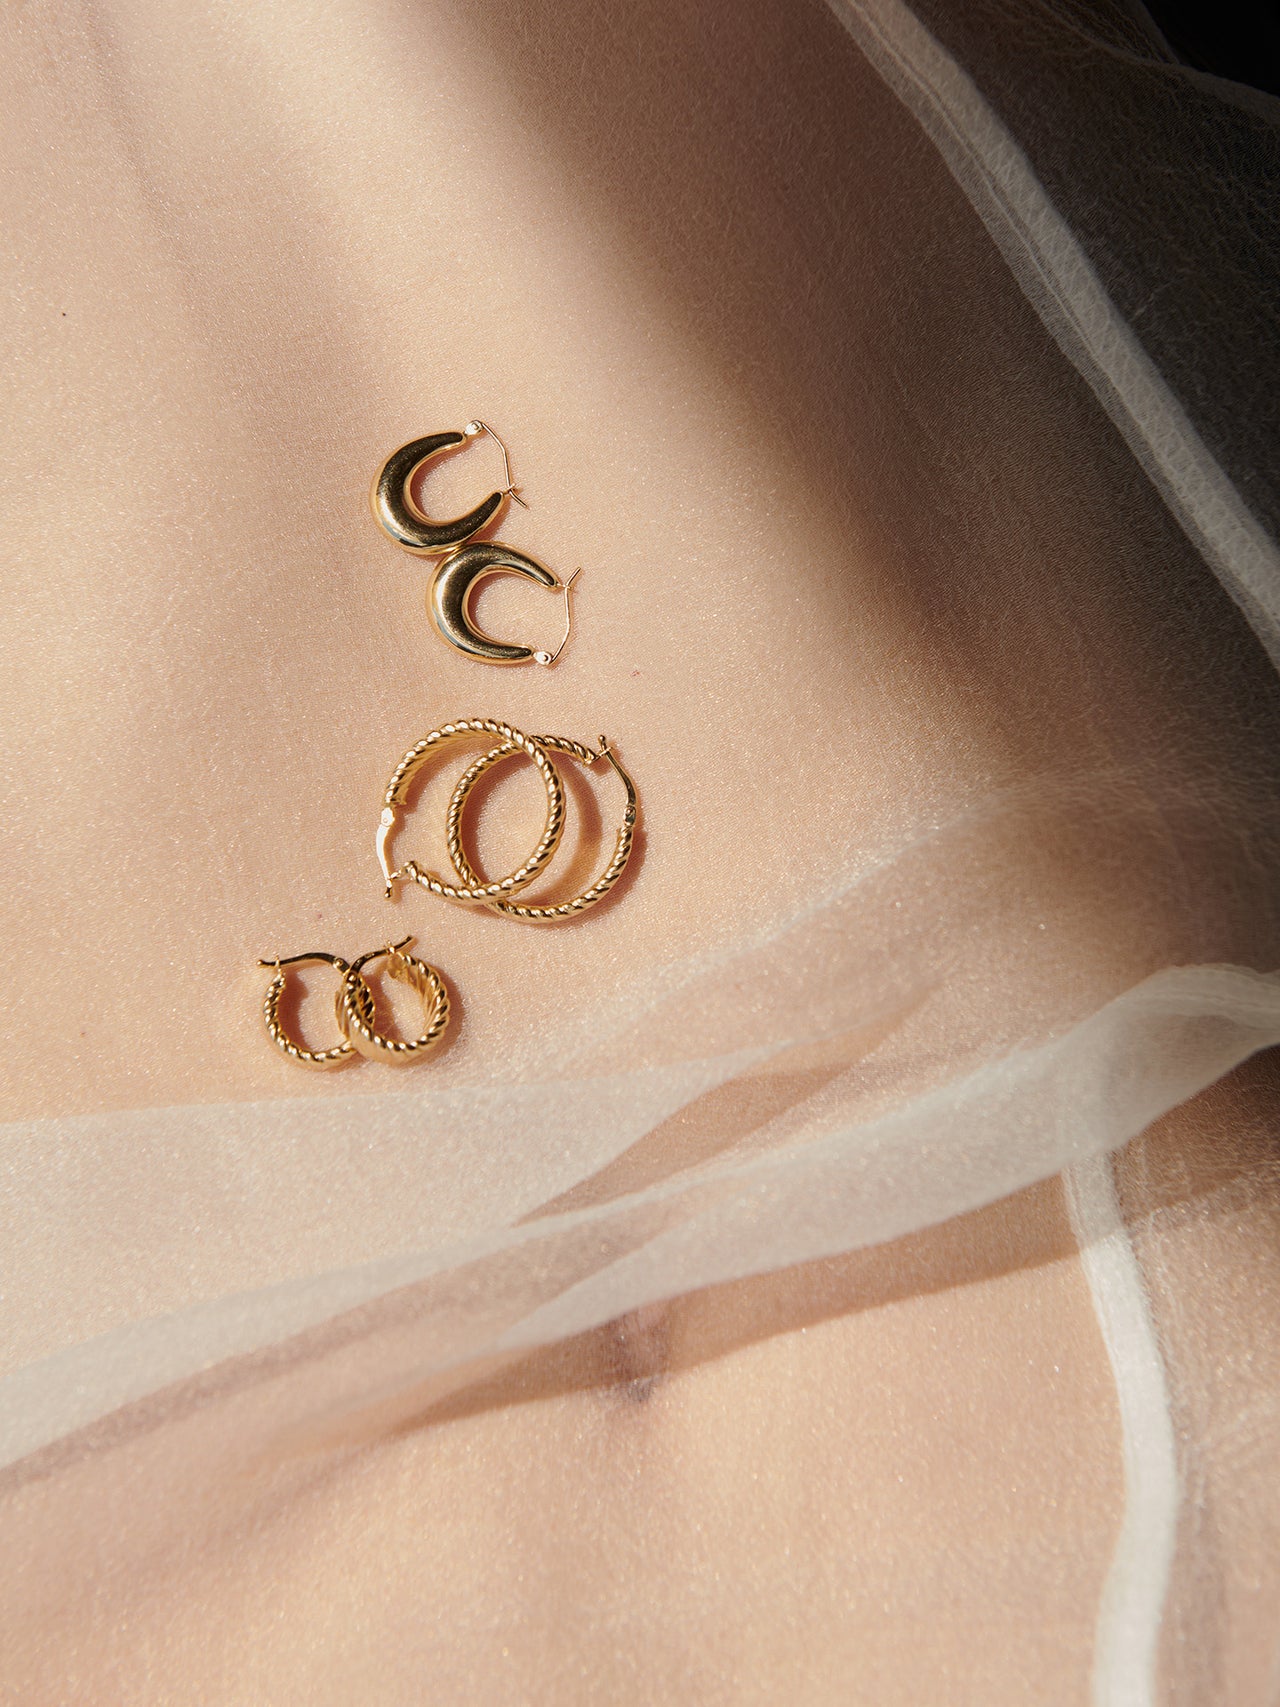 14kt Yellow Gold Dome Hammock Hoops pictured on stomach, silk material.